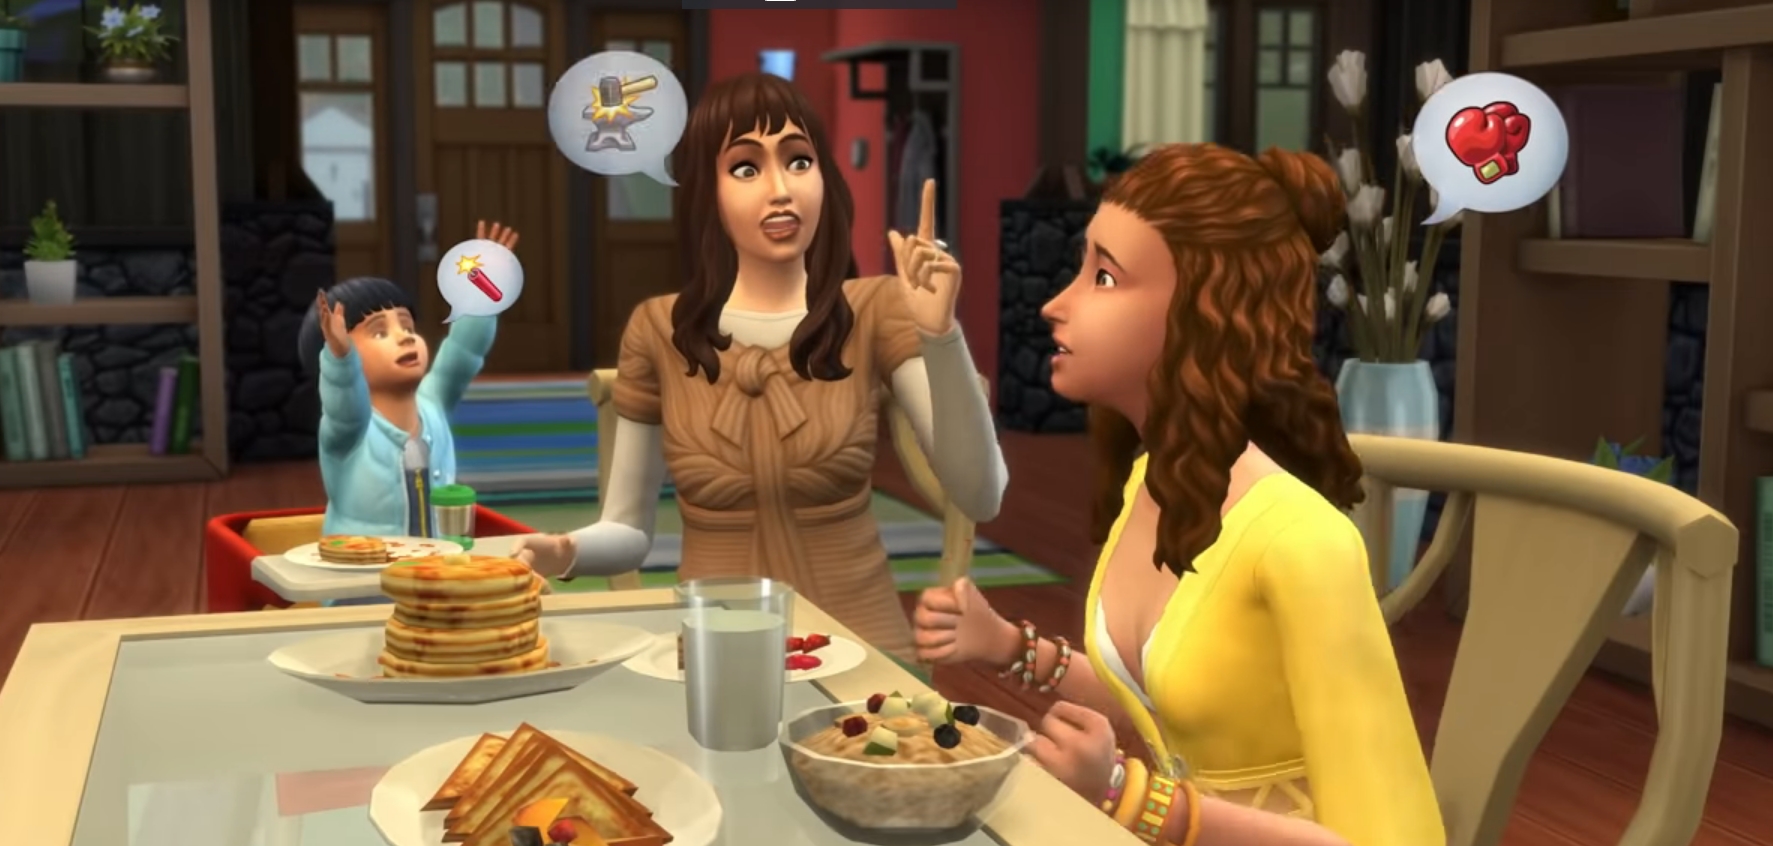 The Sims 4 Is Still Going Strong As It Reached 20 Million Lifetime Players